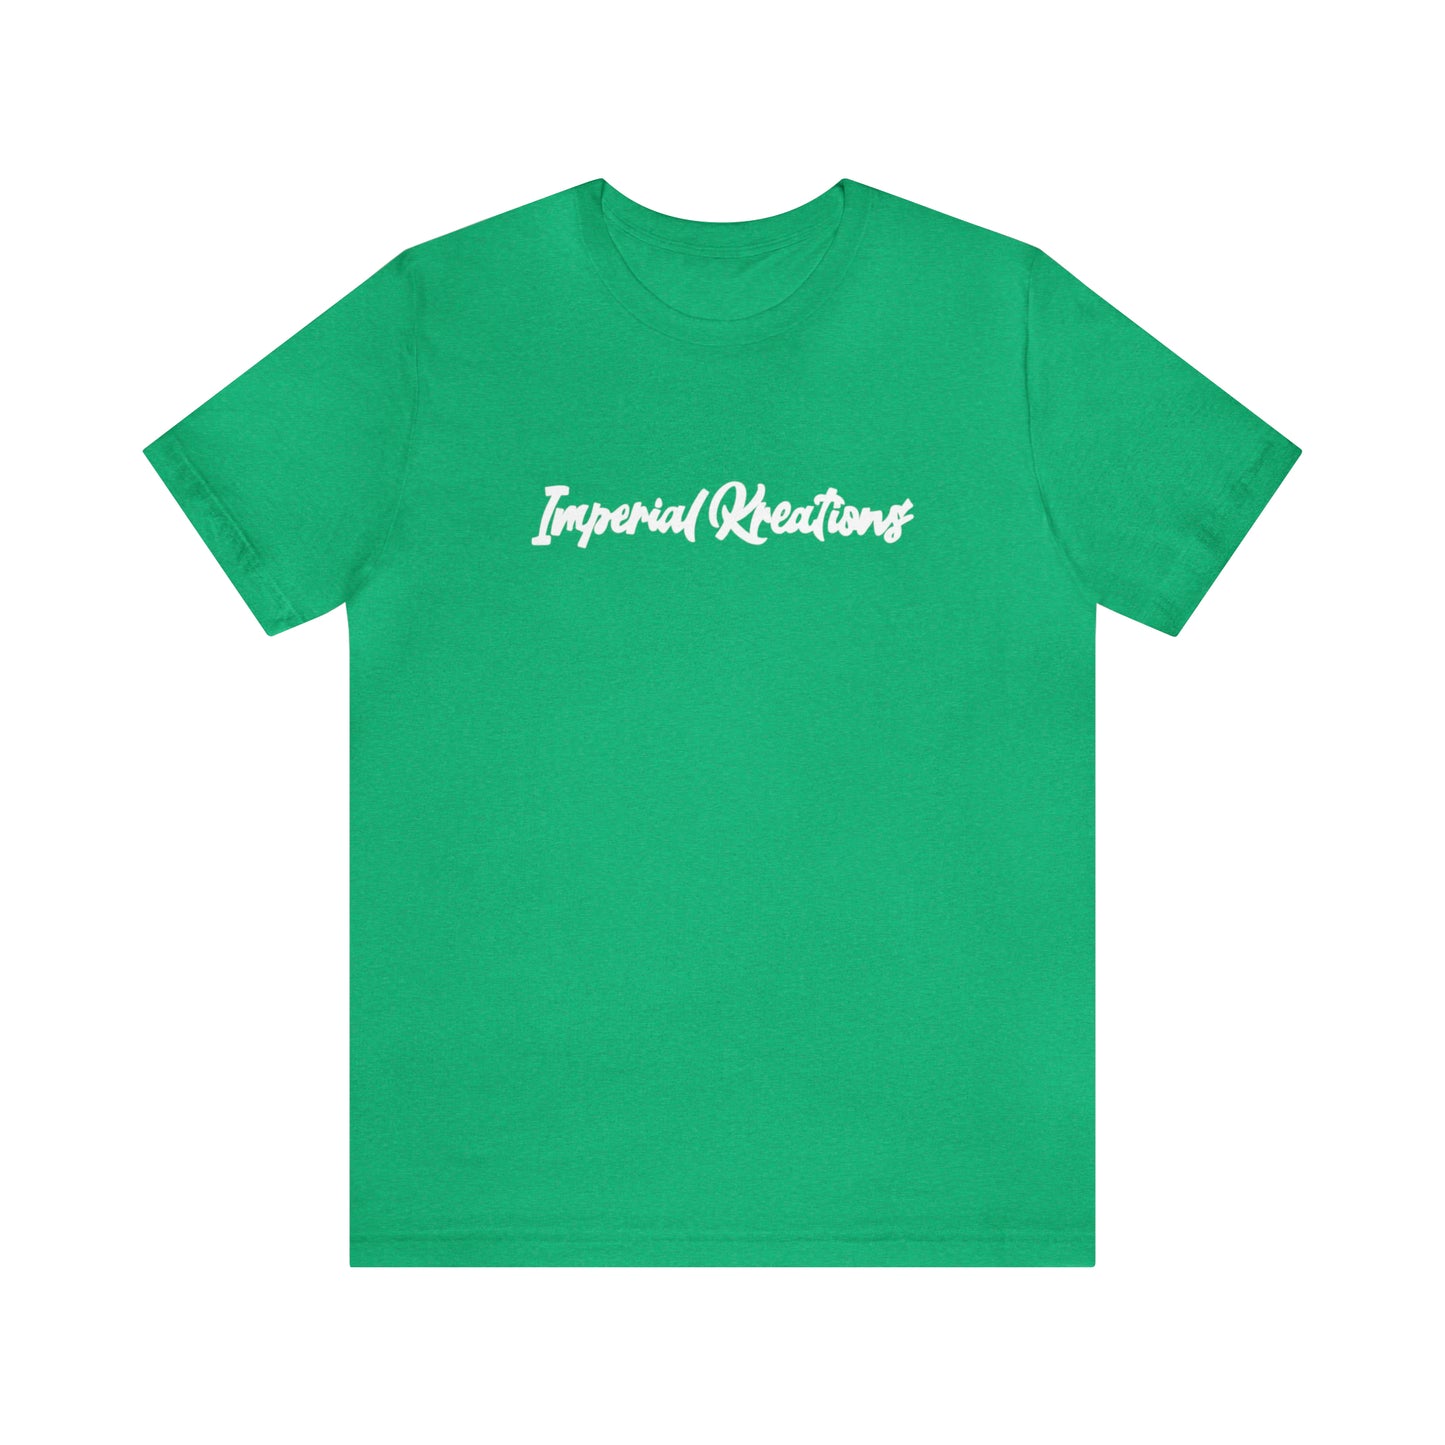 Imperial Kreations T-shirt